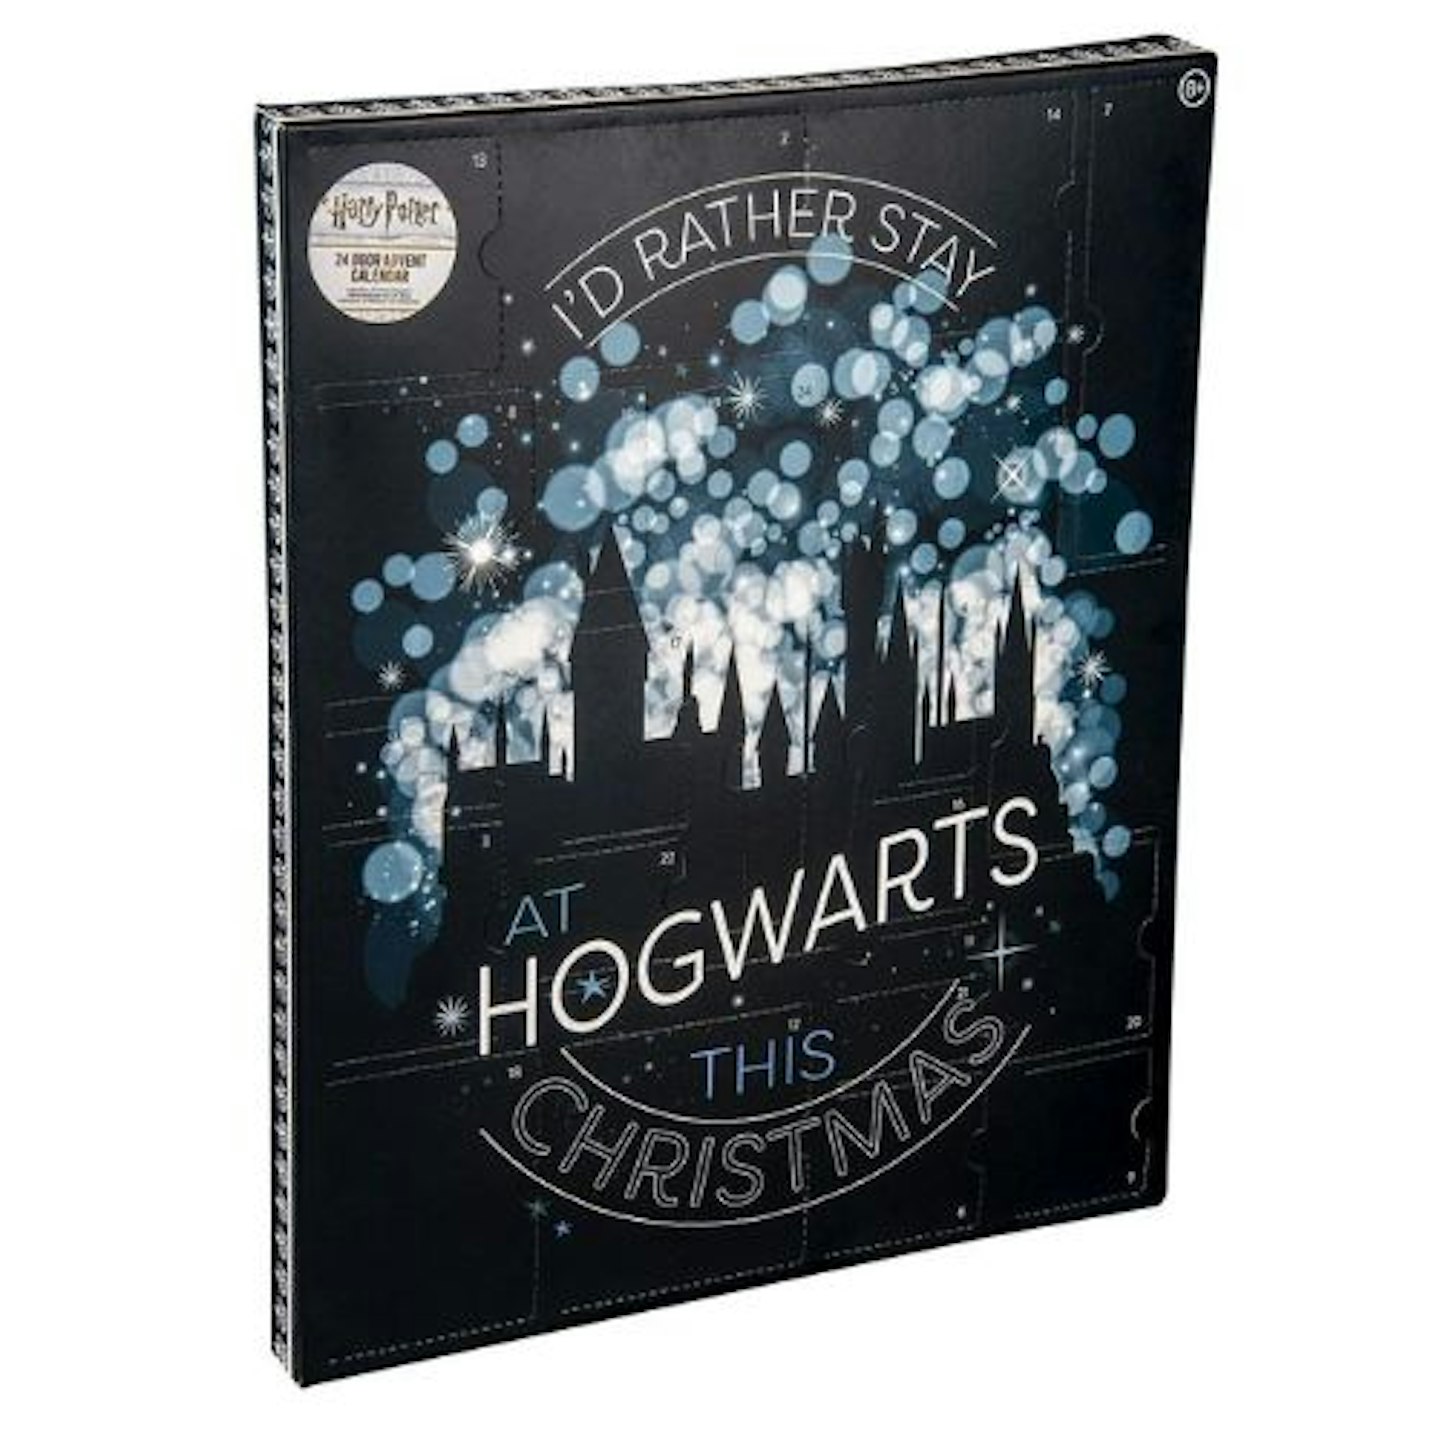 I'd Rather Stay At Hogwarts This Christmas Advent Calendar